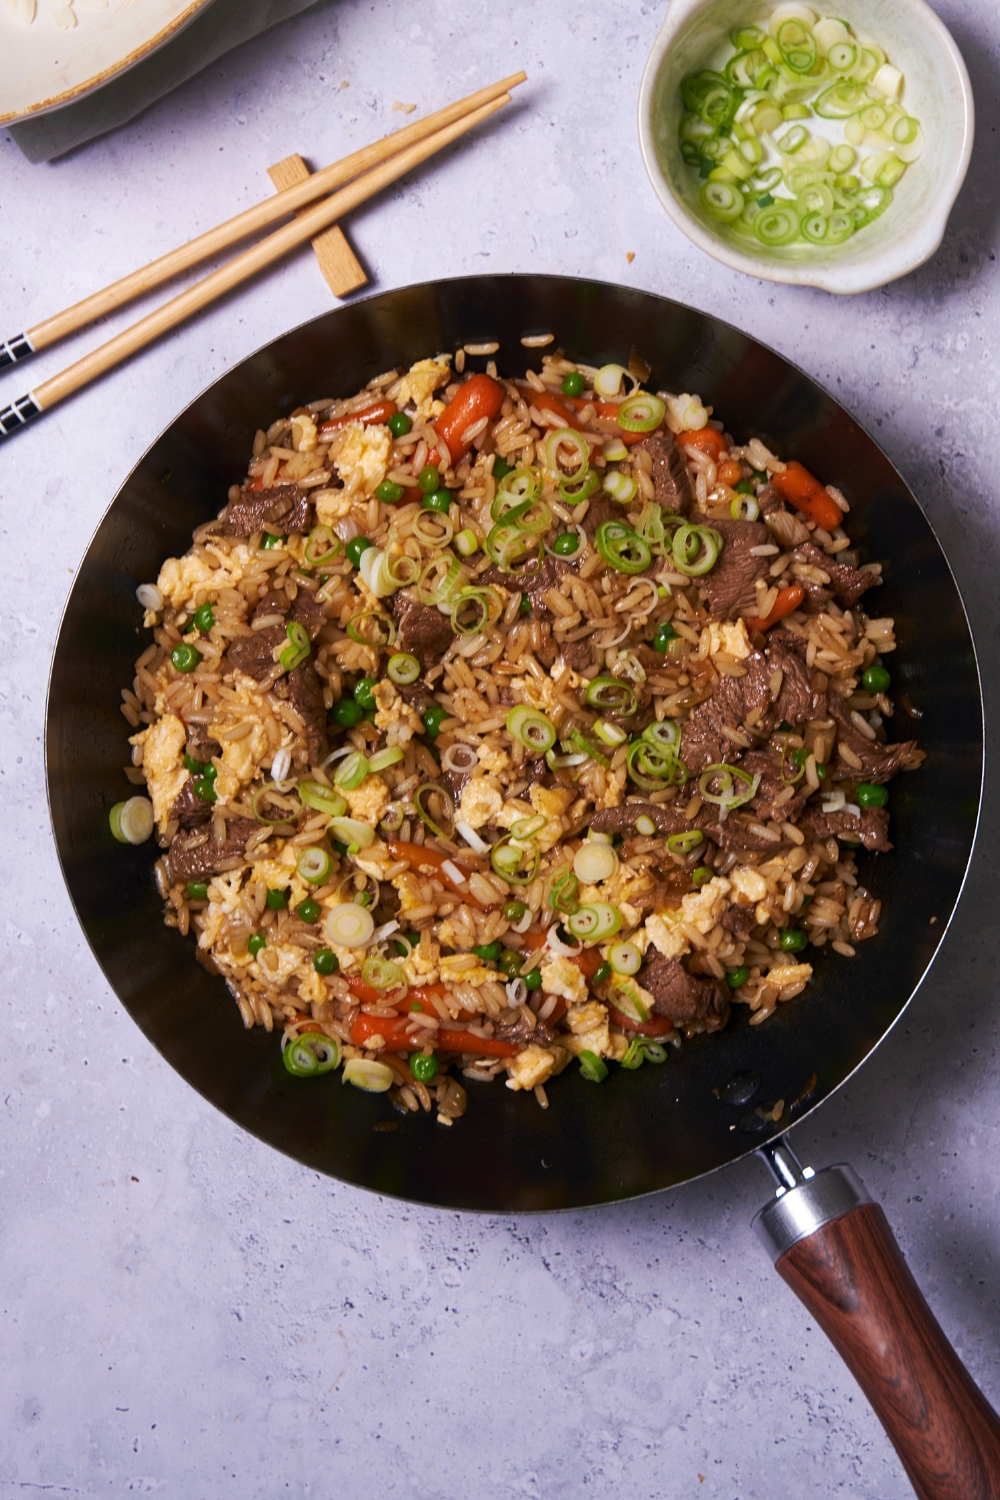 A black skillet filled with rice, peas, carrots, cooked beef, and green onions.